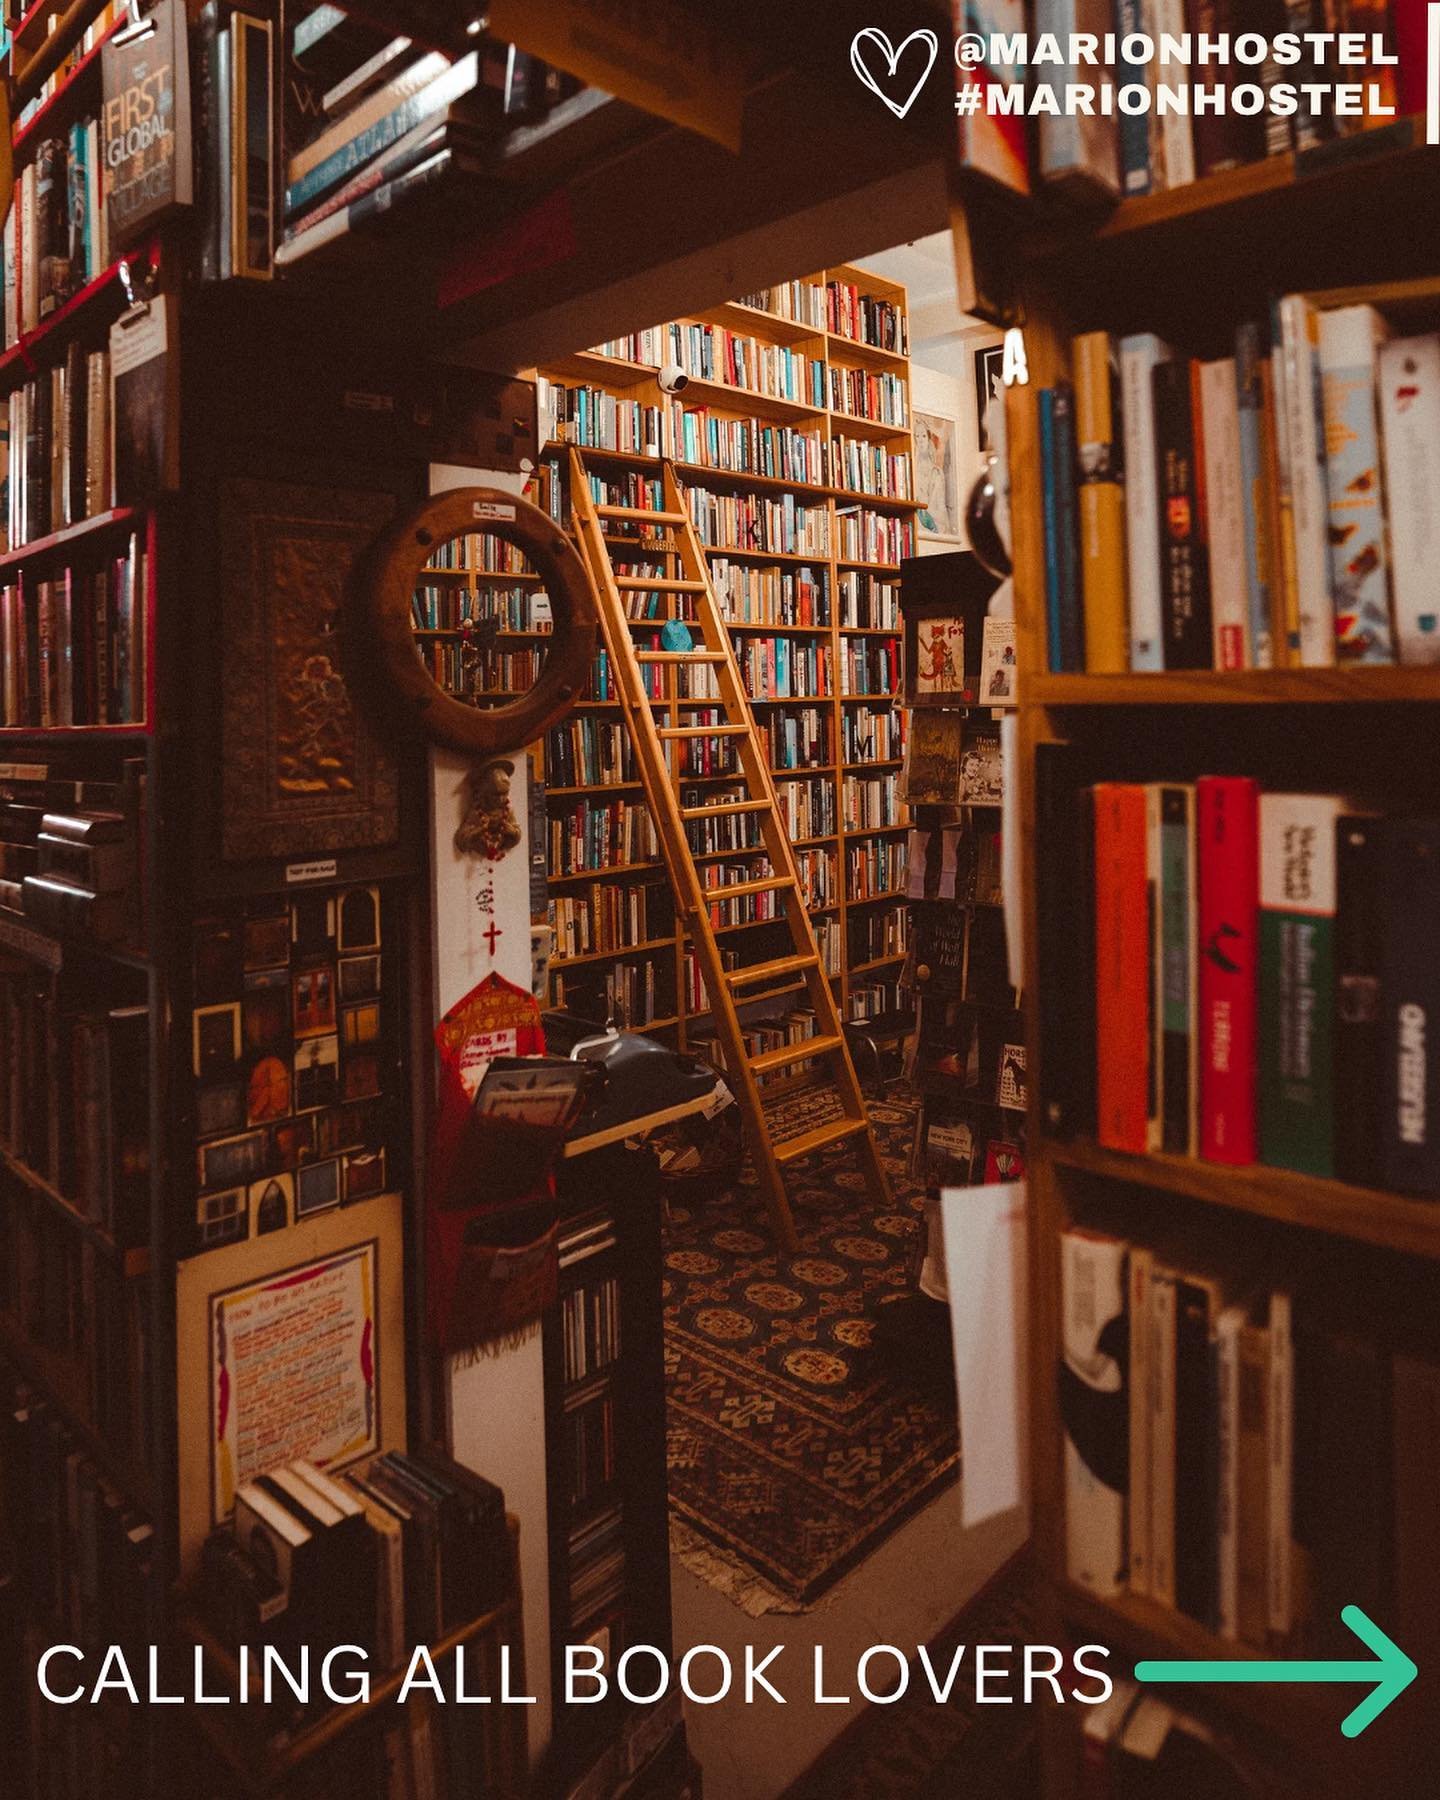 Attention all book lovers! This week, we&rsquo;ve been discovering our favorite local bookstores. Whether you&rsquo;re a local or just visiting for a few days, be sure to stop by these bookstores to find a second-hand gem. Share your favorites with u